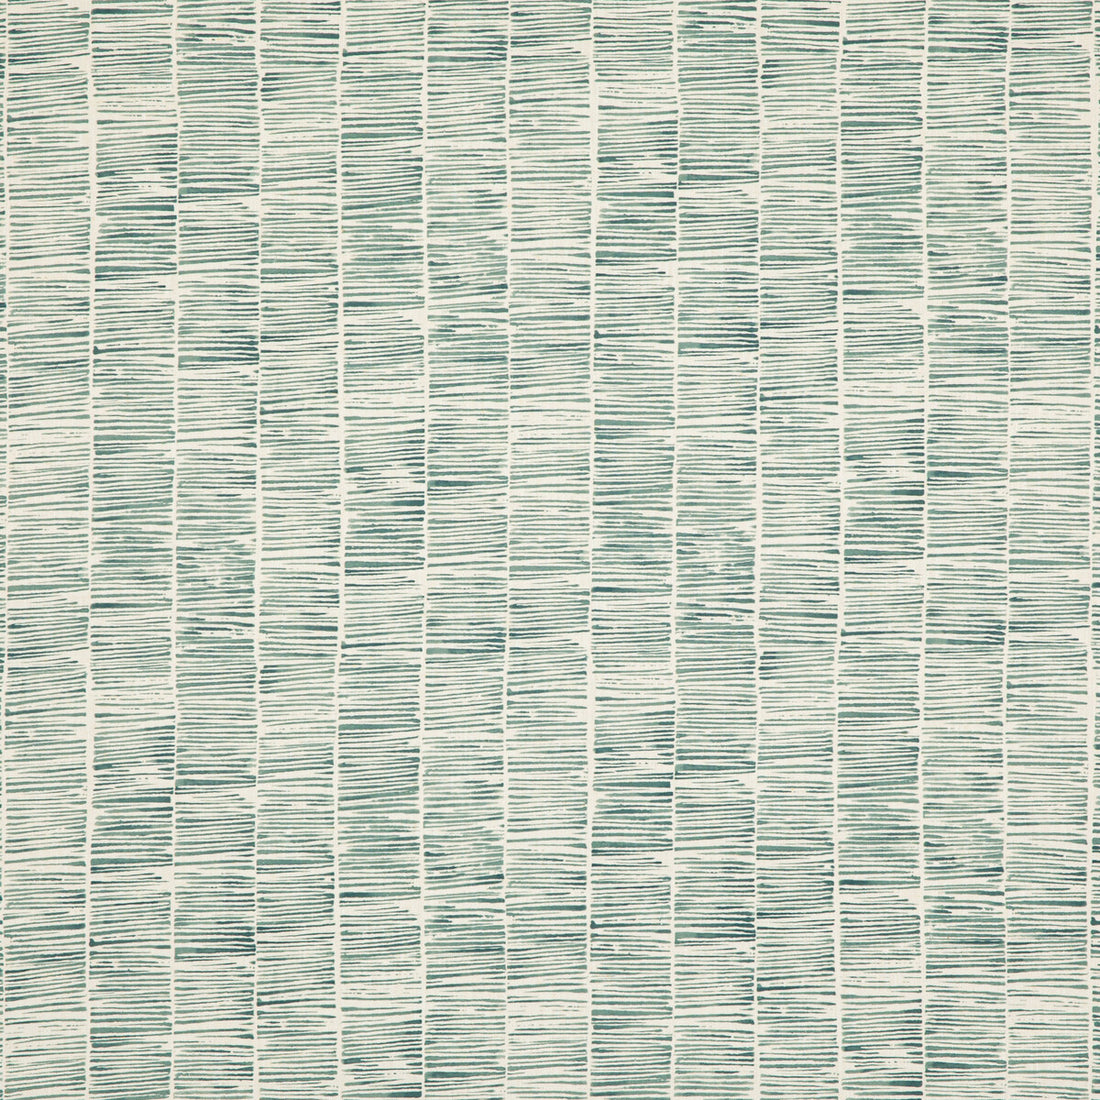 Etching fabric in teal color - pattern ED75044.3.0 - by Threads in the Nala Prints collection